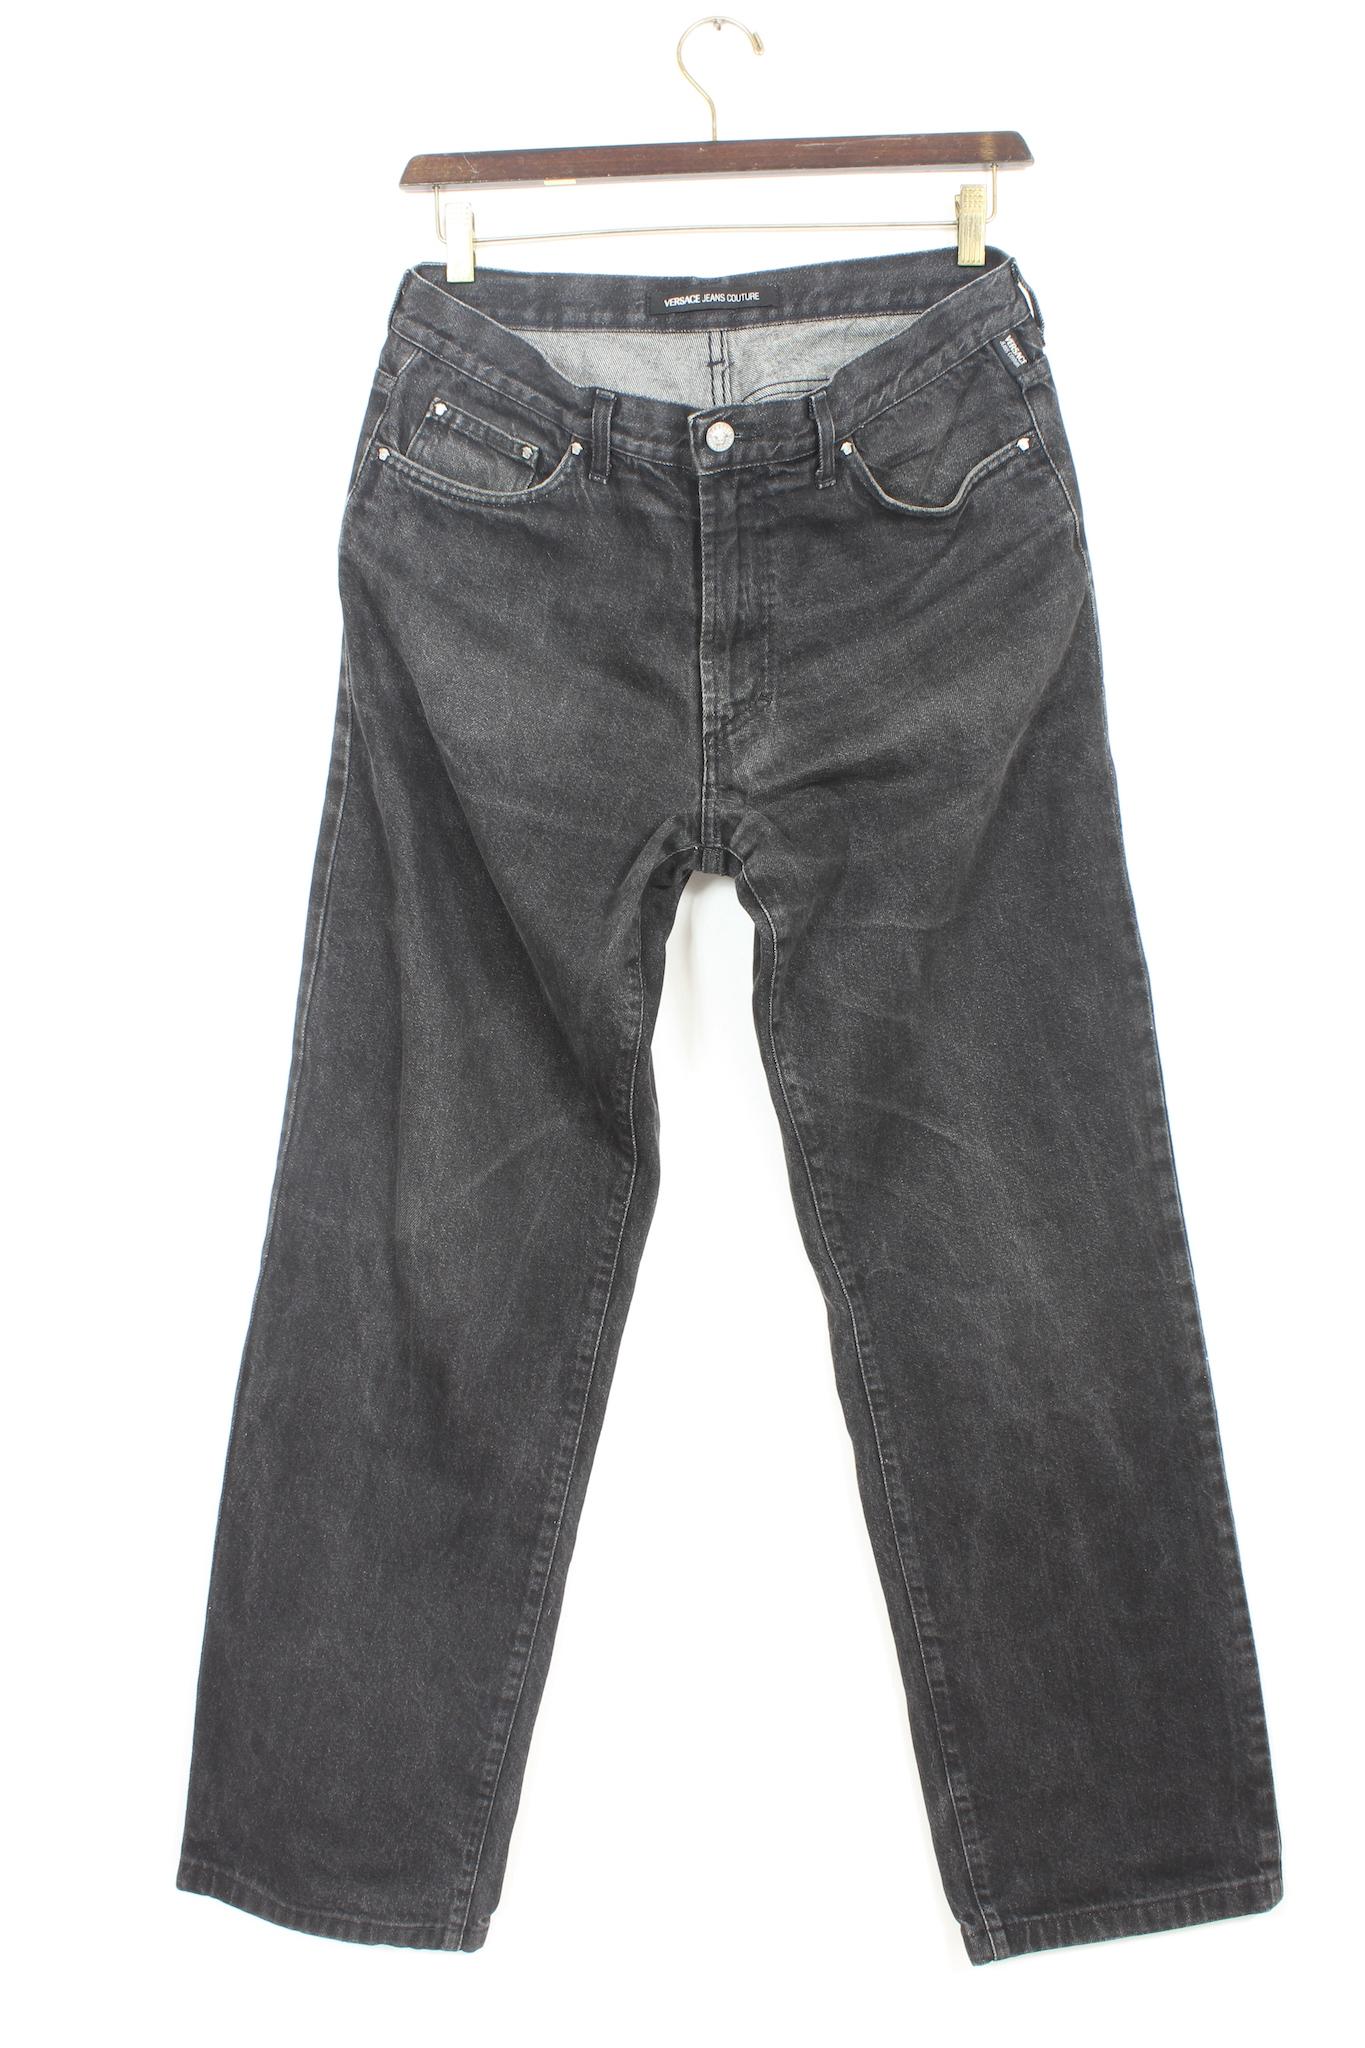 Versace Black Cotton Straight Jeans 1990s In Excellent Condition For Sale In Brindisi, Bt